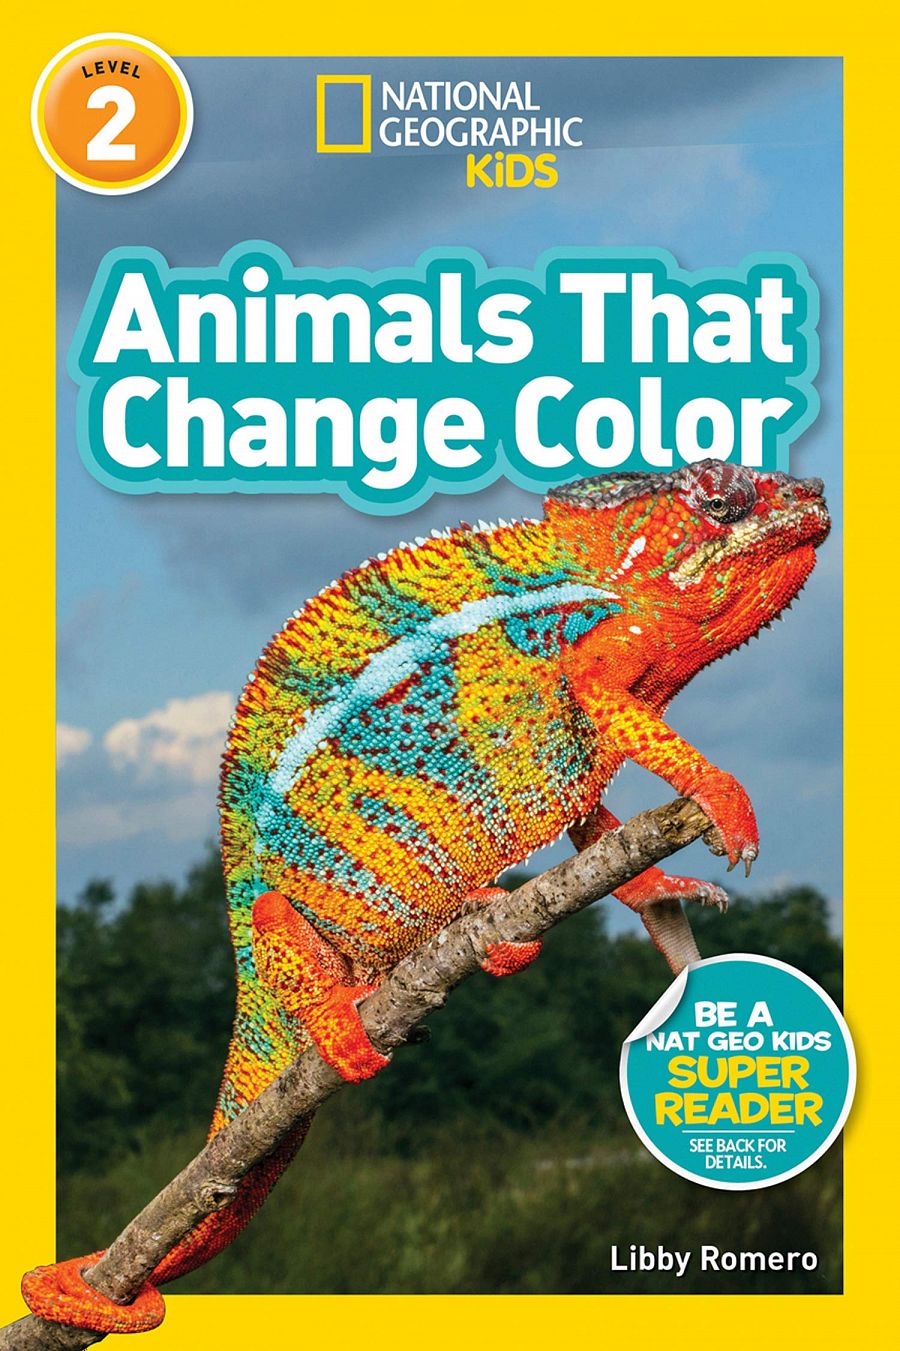 Animals That Change Color book cover